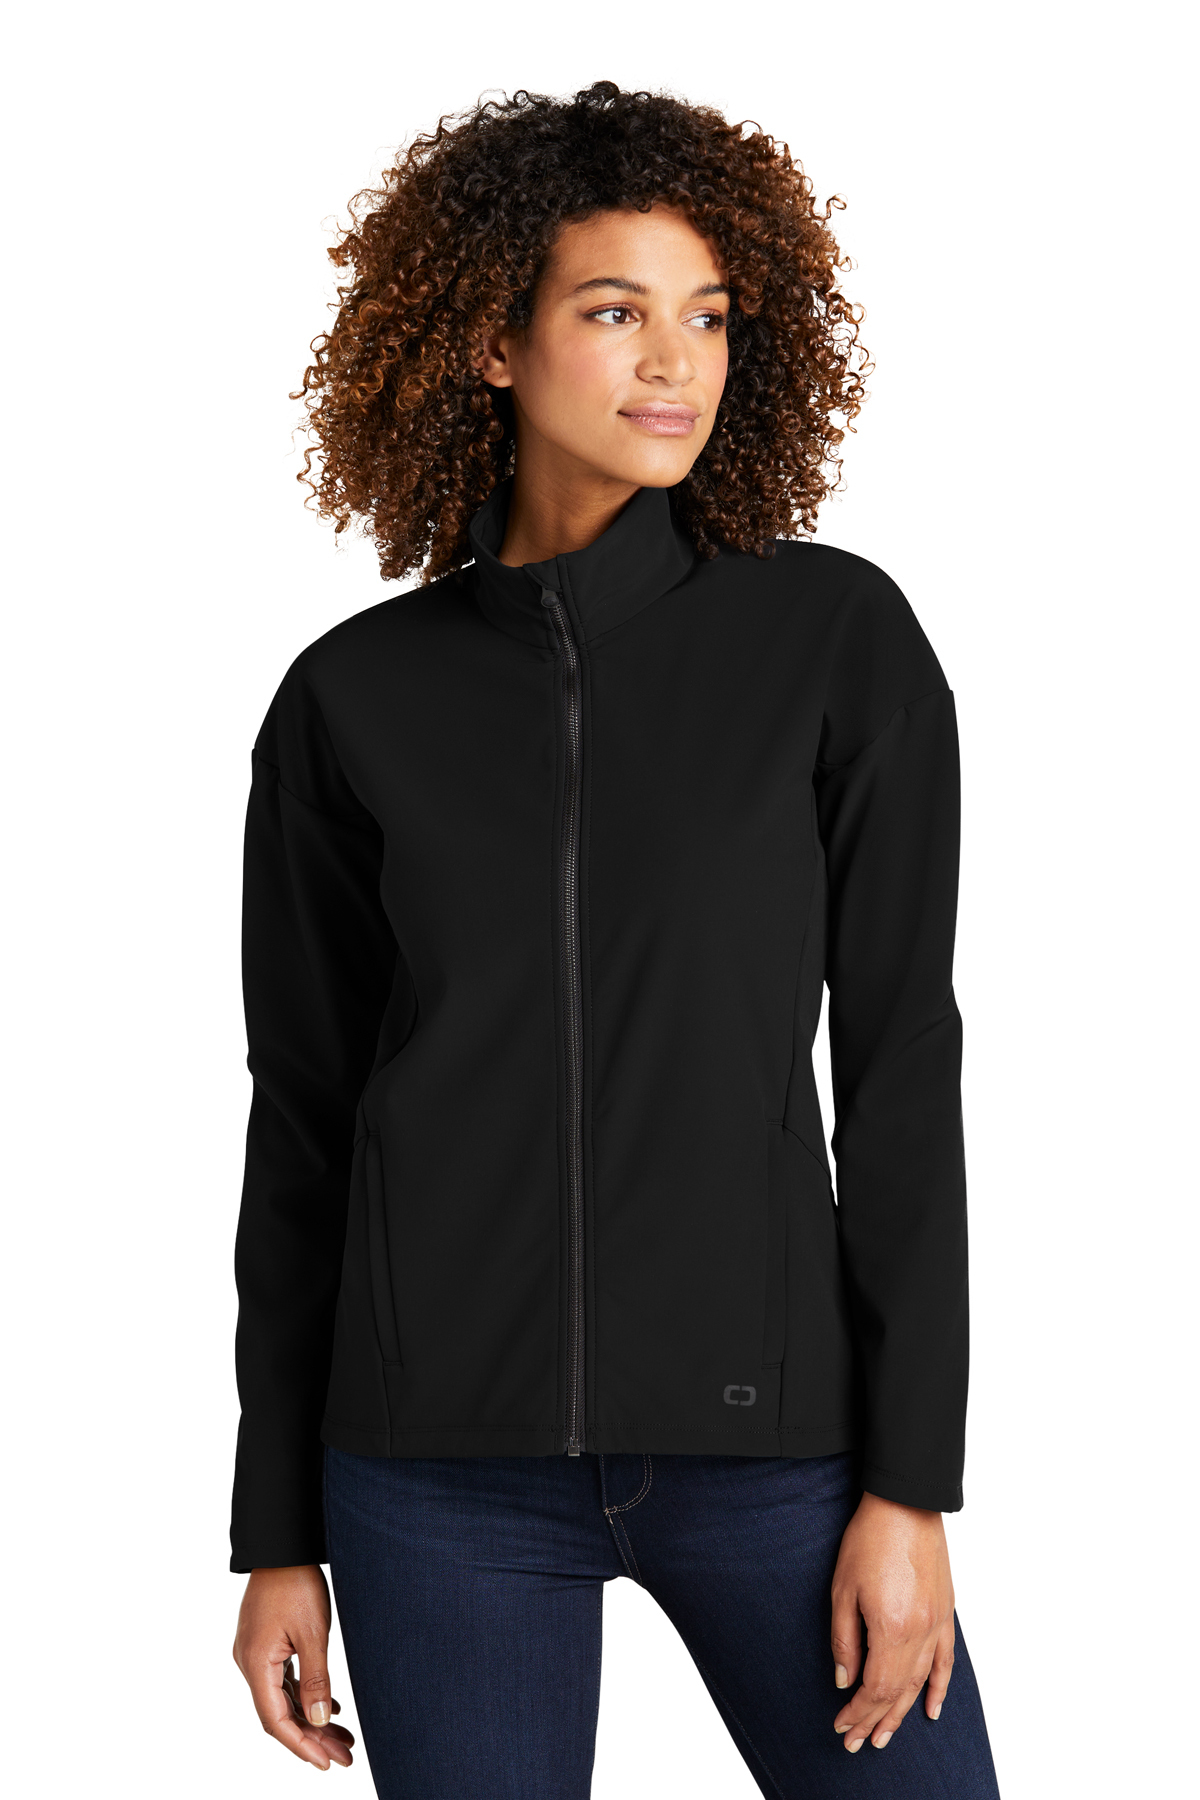 OGIO Ladies Commuter Full-Zip Soft Shell | Product | Company Casuals